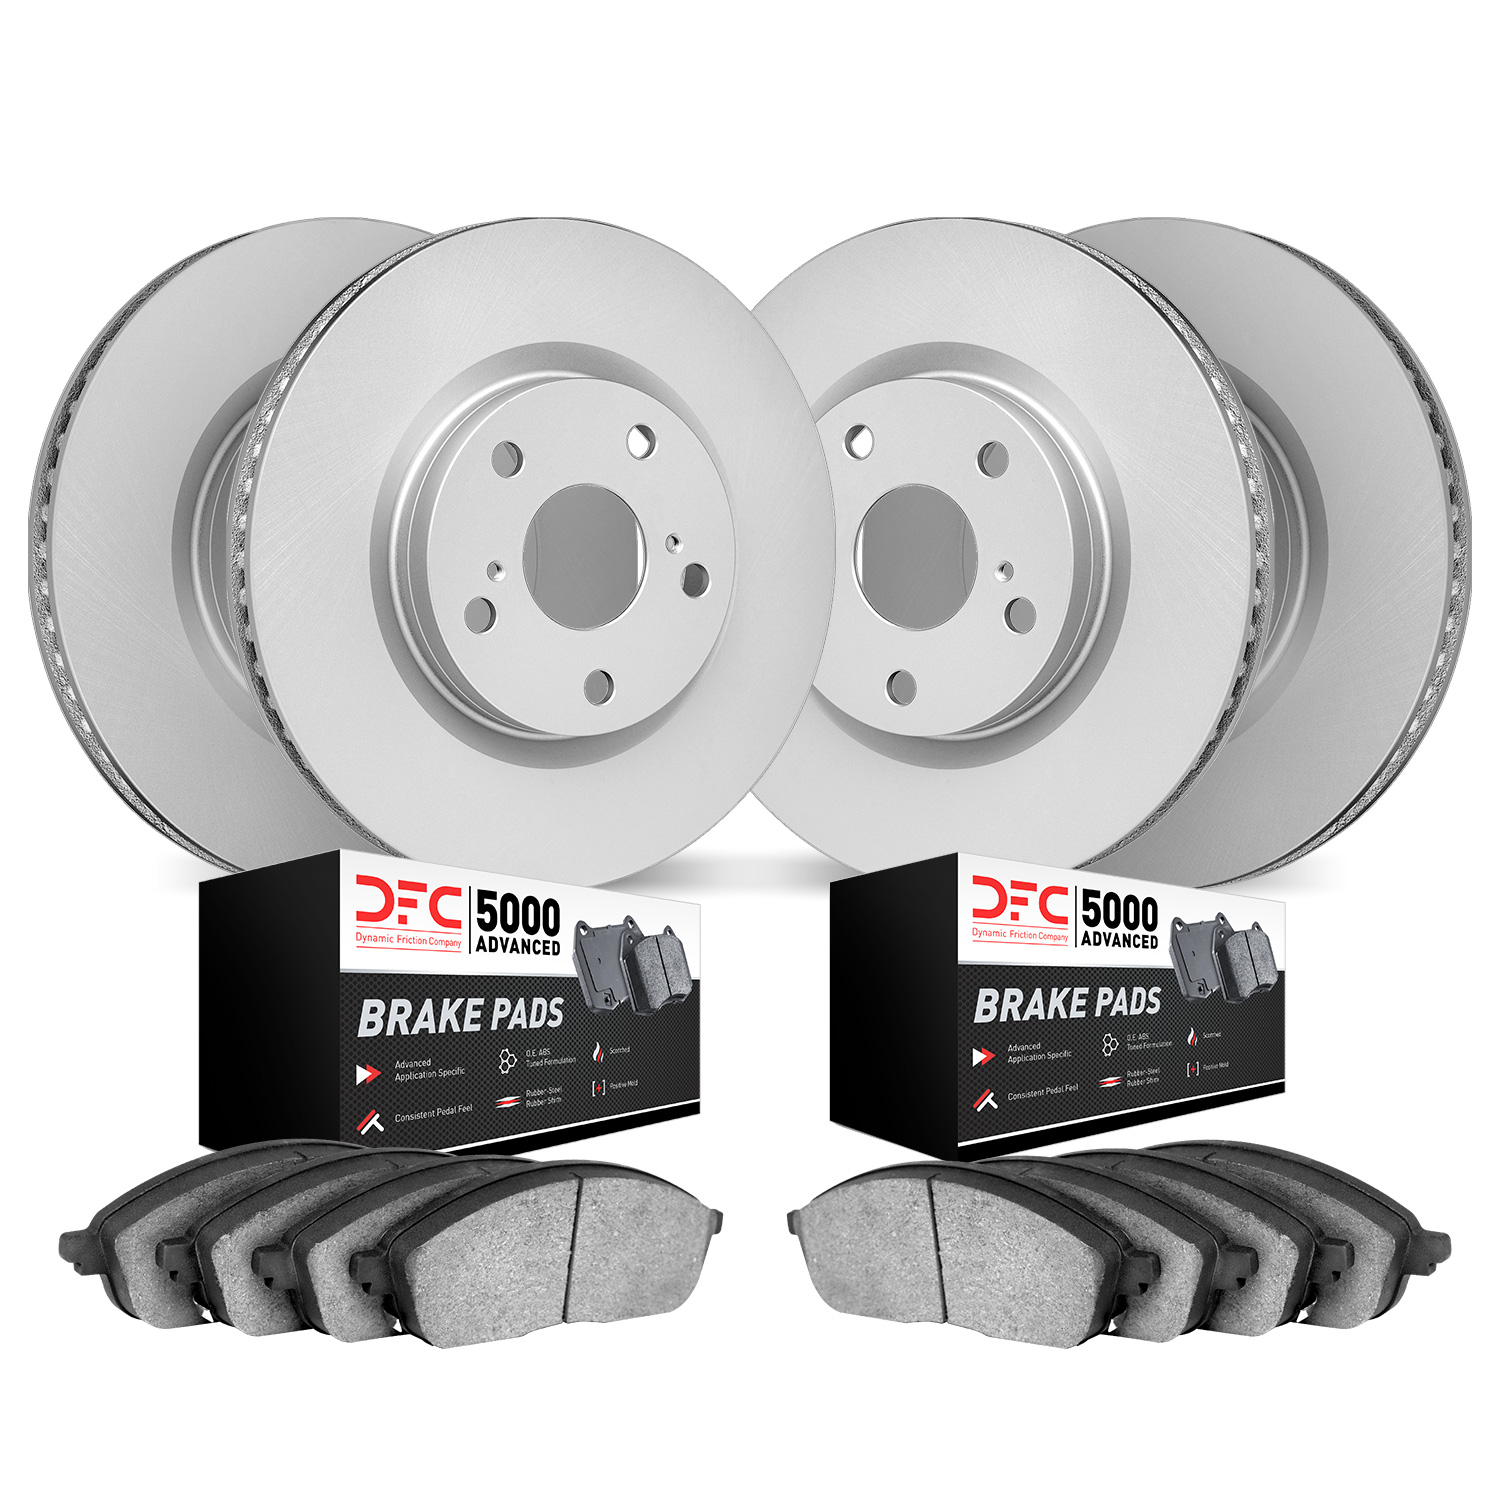 4504-54111 Geospec Brake Rotors w/5000 Advanced Brake Pads Kit, Fits Select Ford/Lincoln/Mercury/Mazda, Position: Front and Rear